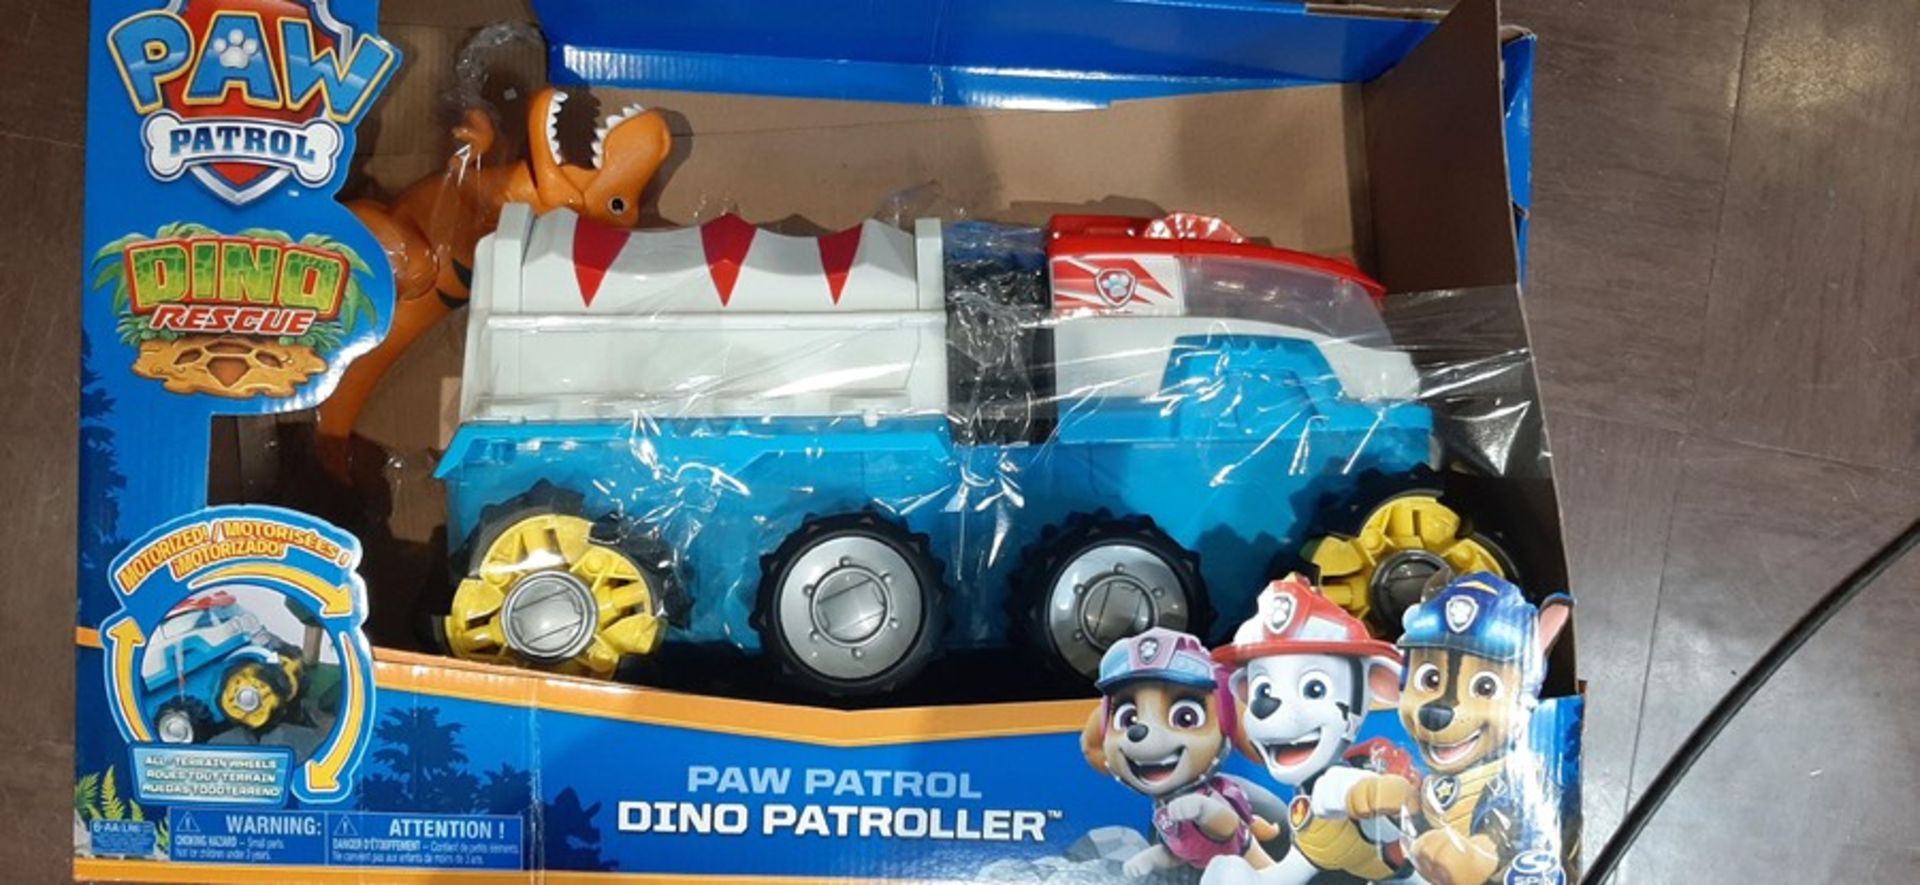 PAW Patrol 6058905 - Dino Rescue Dino Patroller Motorised Team Vehicle with Exclusive Chase and - Image 2 of 2